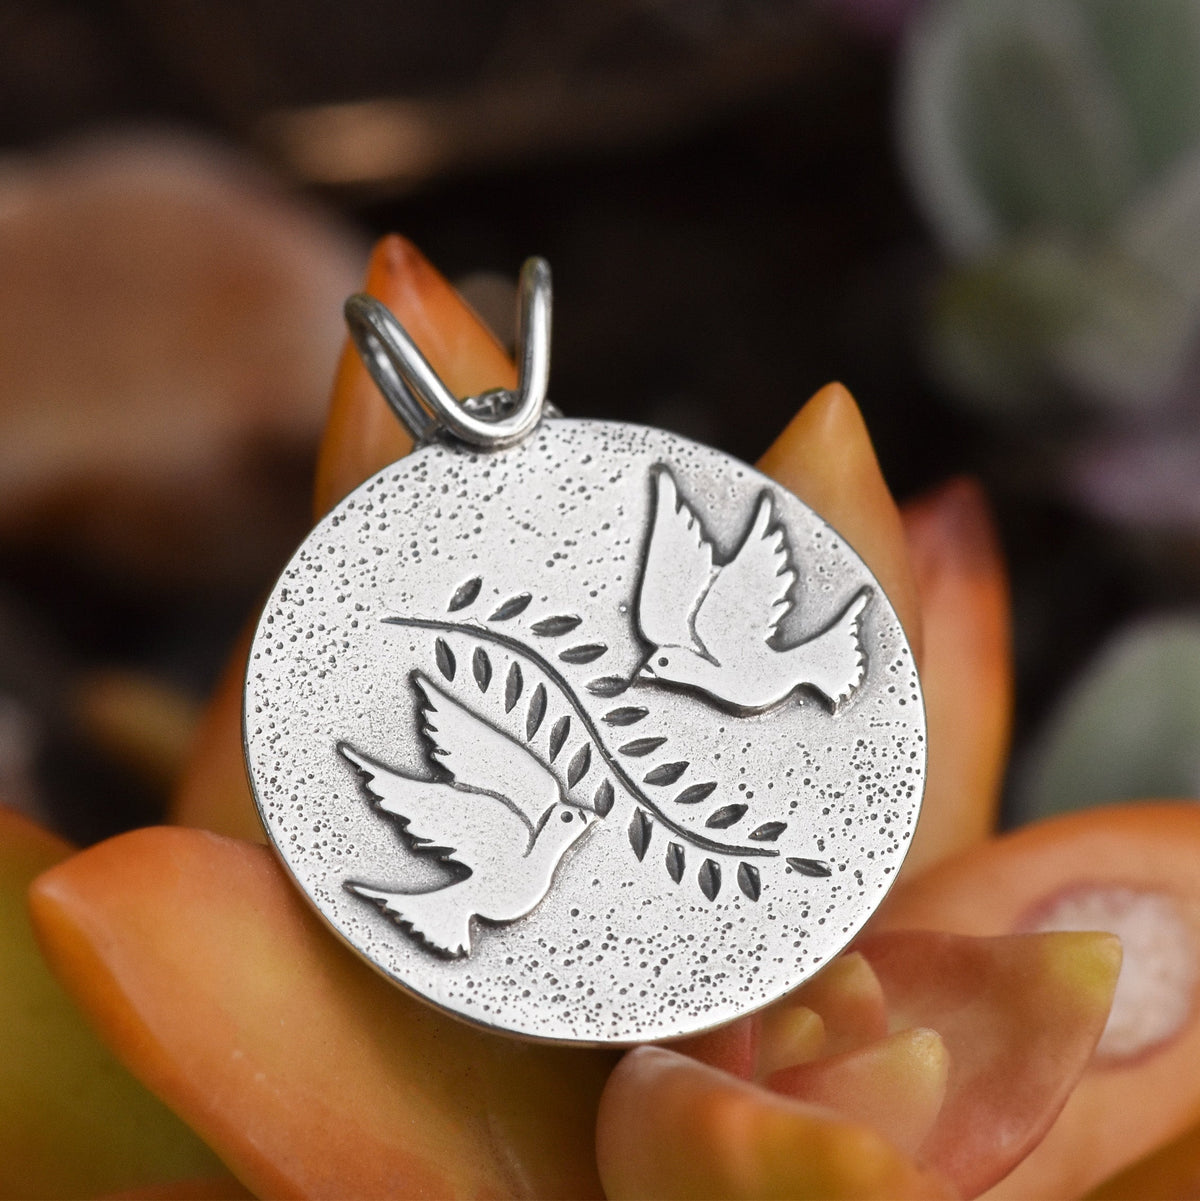 Extended Branch Pendant - Fundraiser for the Marquette Women's Center - Silver Pendant   7134 - handmade by Beth Millner Jewelry